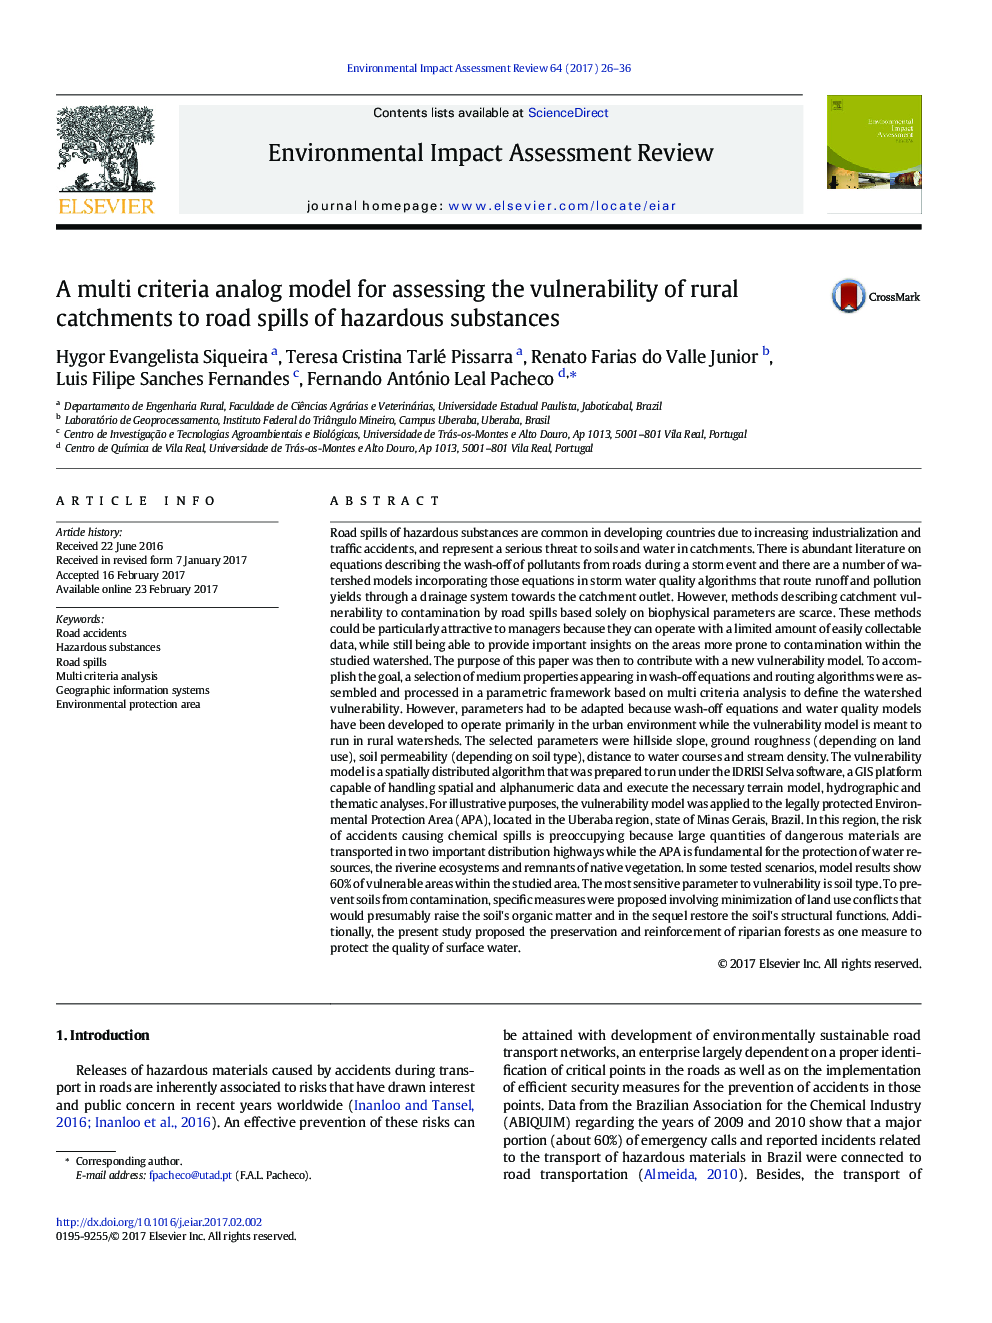 A multi criteria analog model for assessing the vulnerability of rural catchments to road spills of hazardous substances